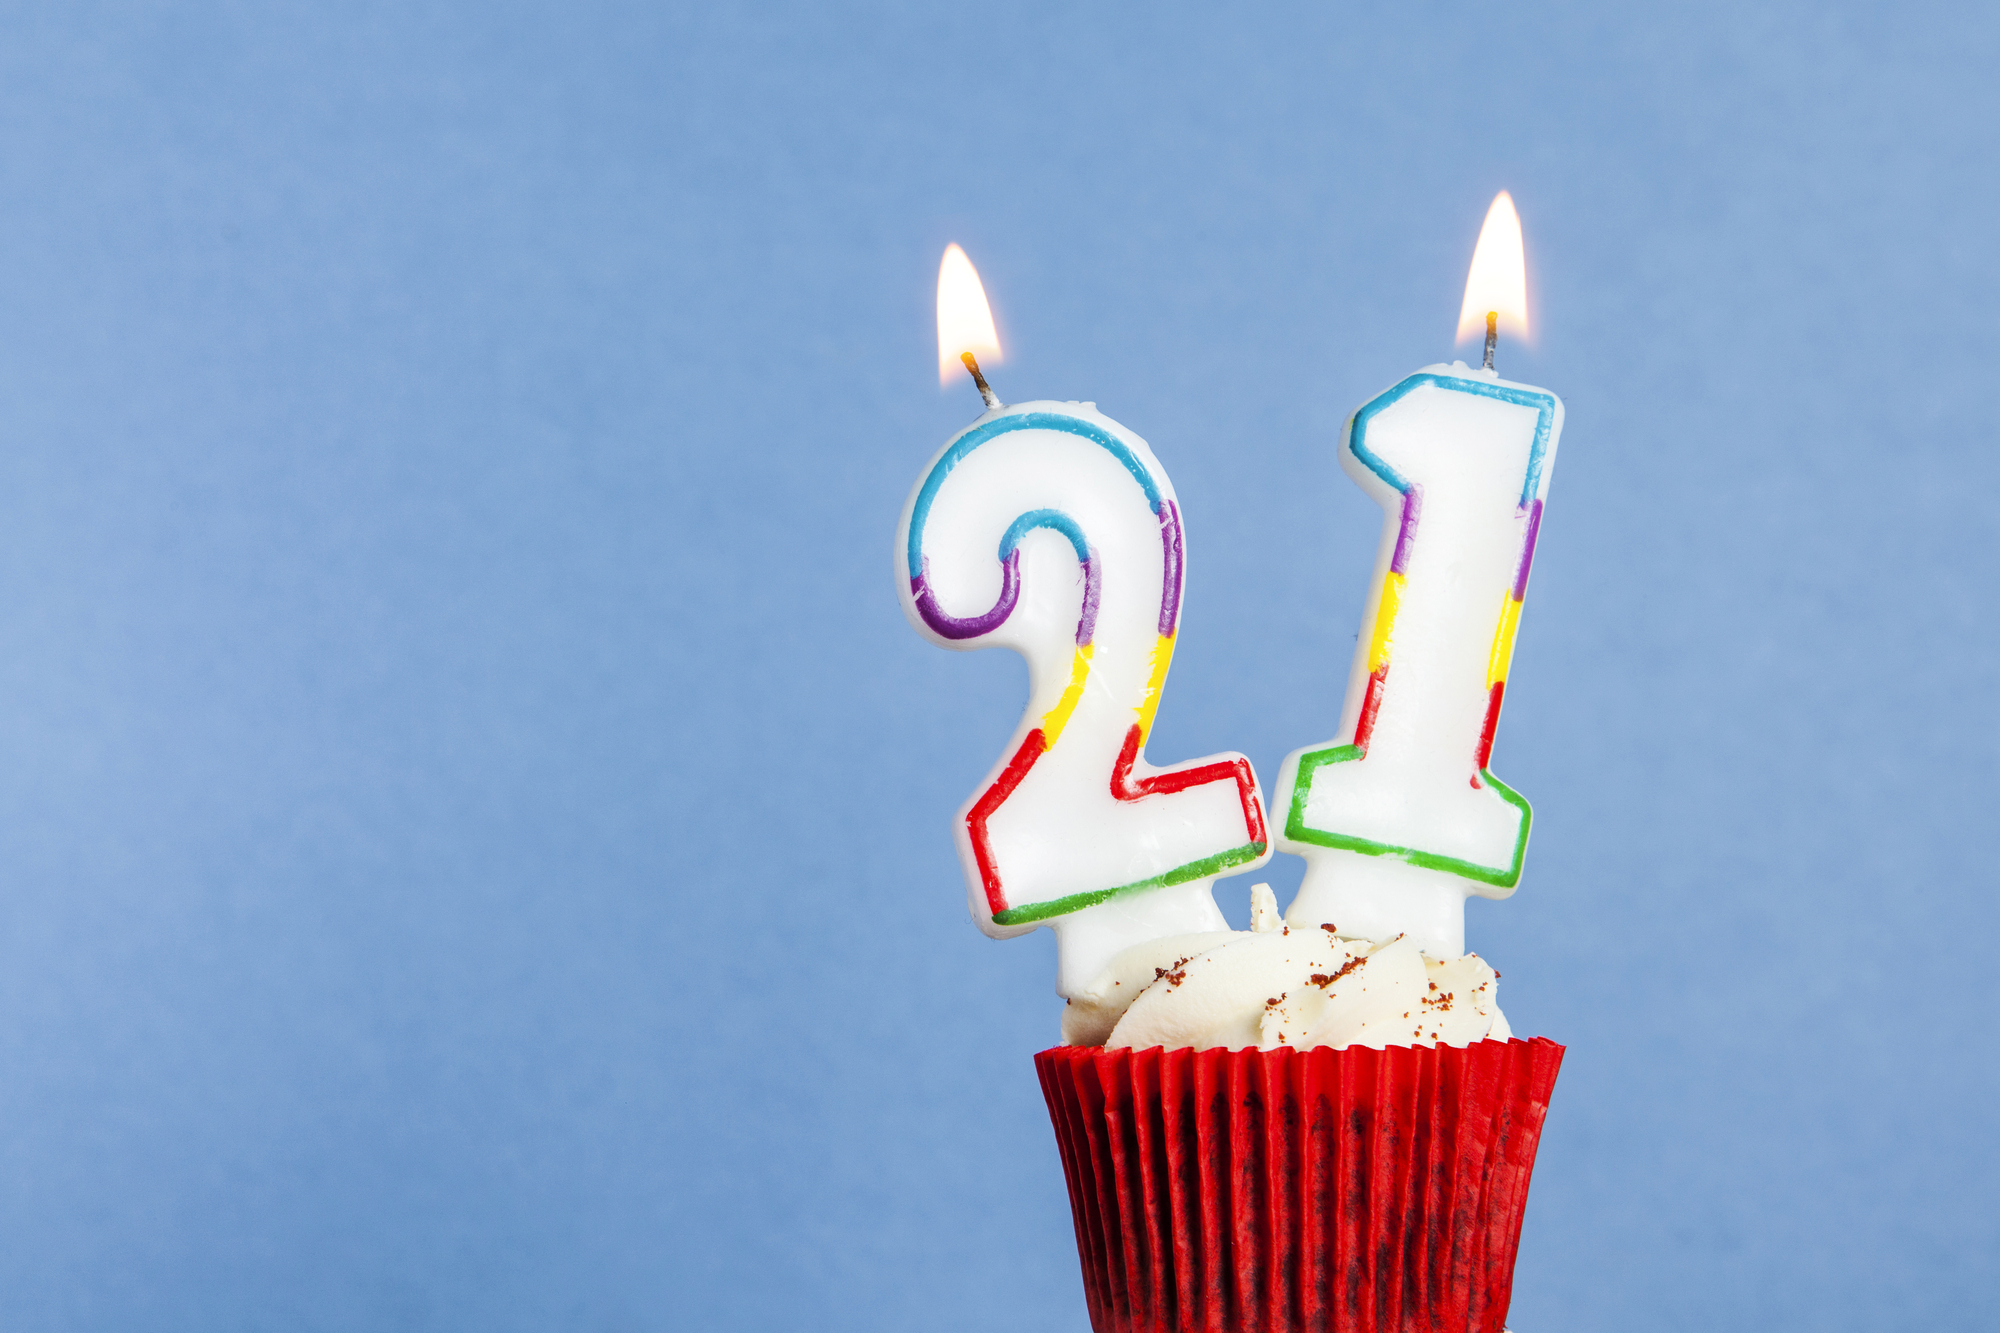 How to surprise someone by Rather Rude Cards: Best 21st Birthday Party ideas for Guys